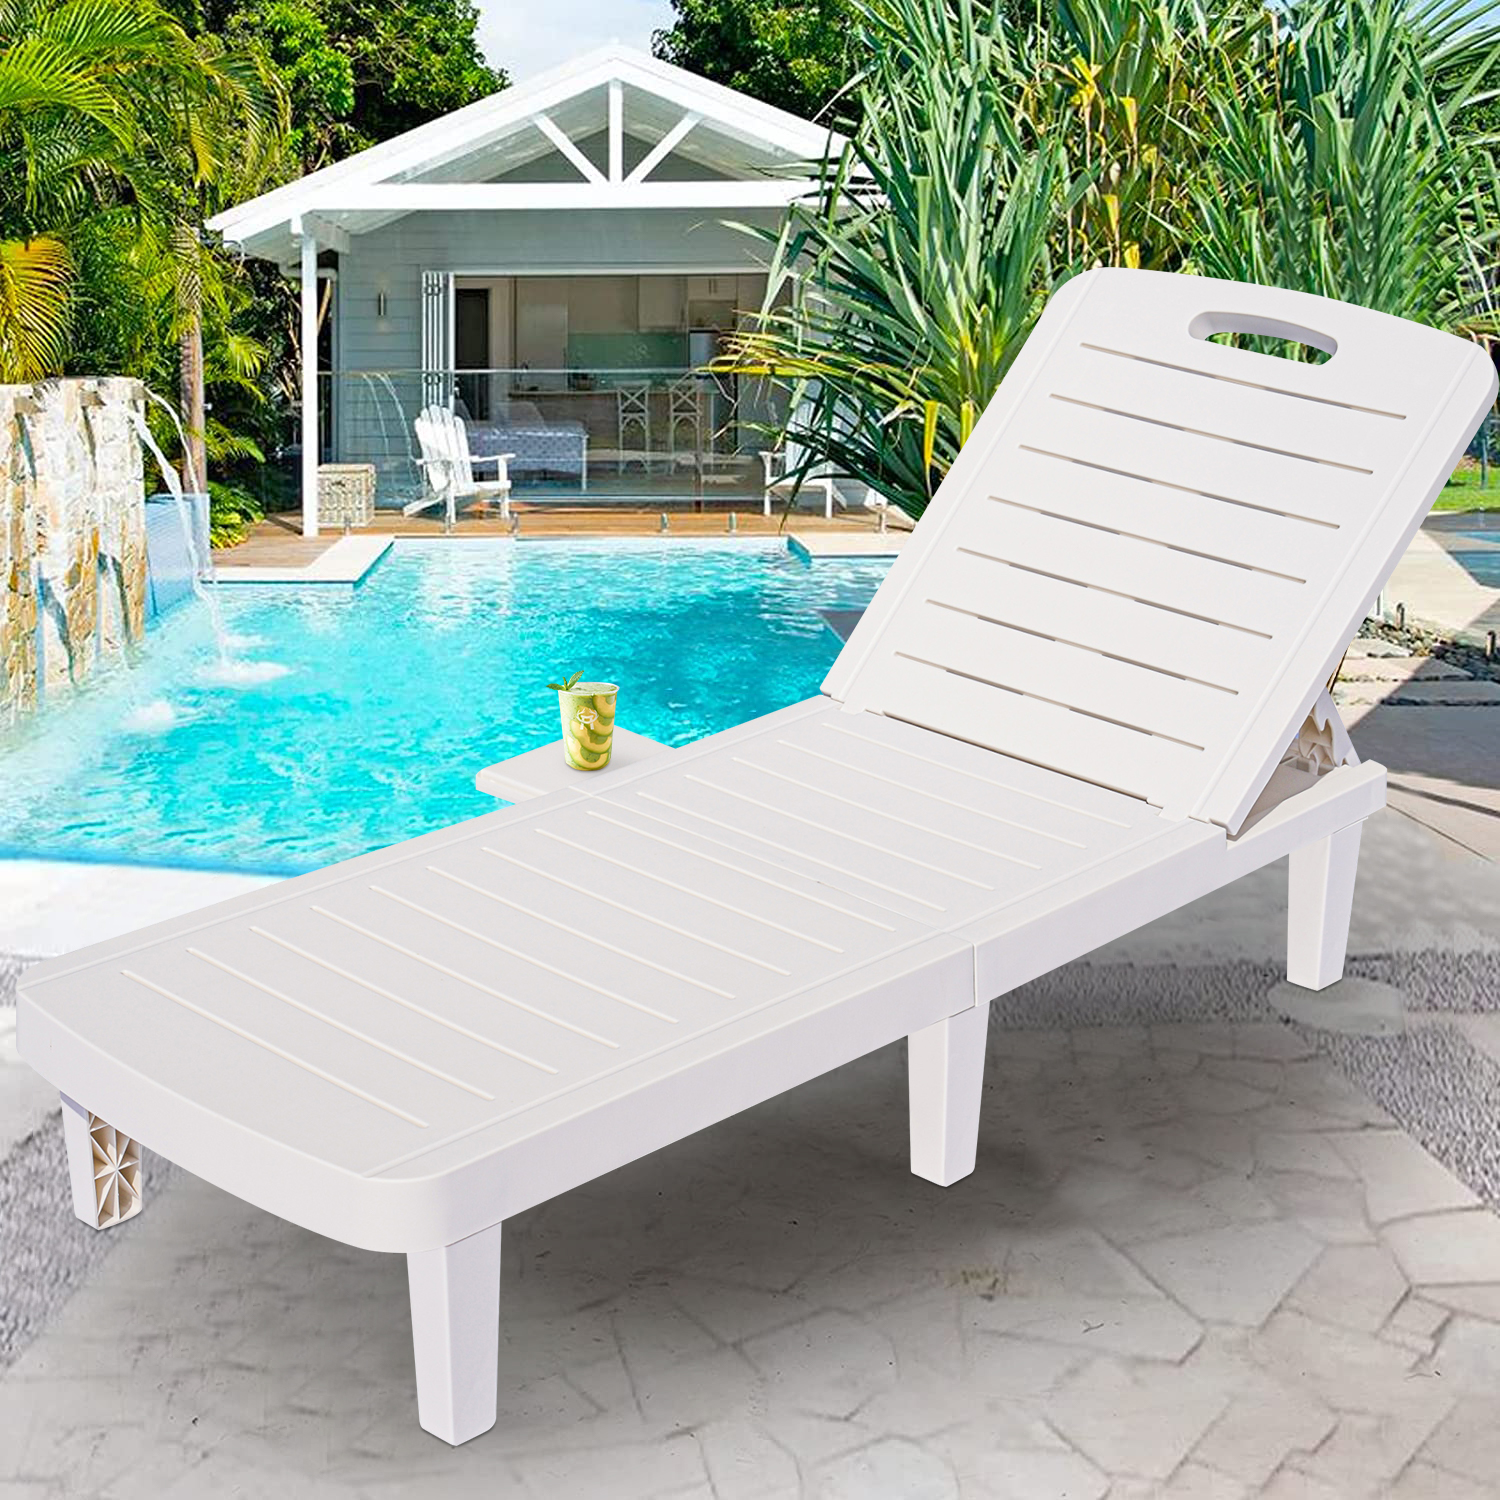 Chaise Lounge Chair, Patio Furniture Single Patio Chaise Lounge Chair w/ Adjustable Backrest/Retractable Tray, Plastic Reclining Lounge Chair for Beach, Backyard, Garden, Poolside, Max Hold 330LBS, L - image 1 of 9